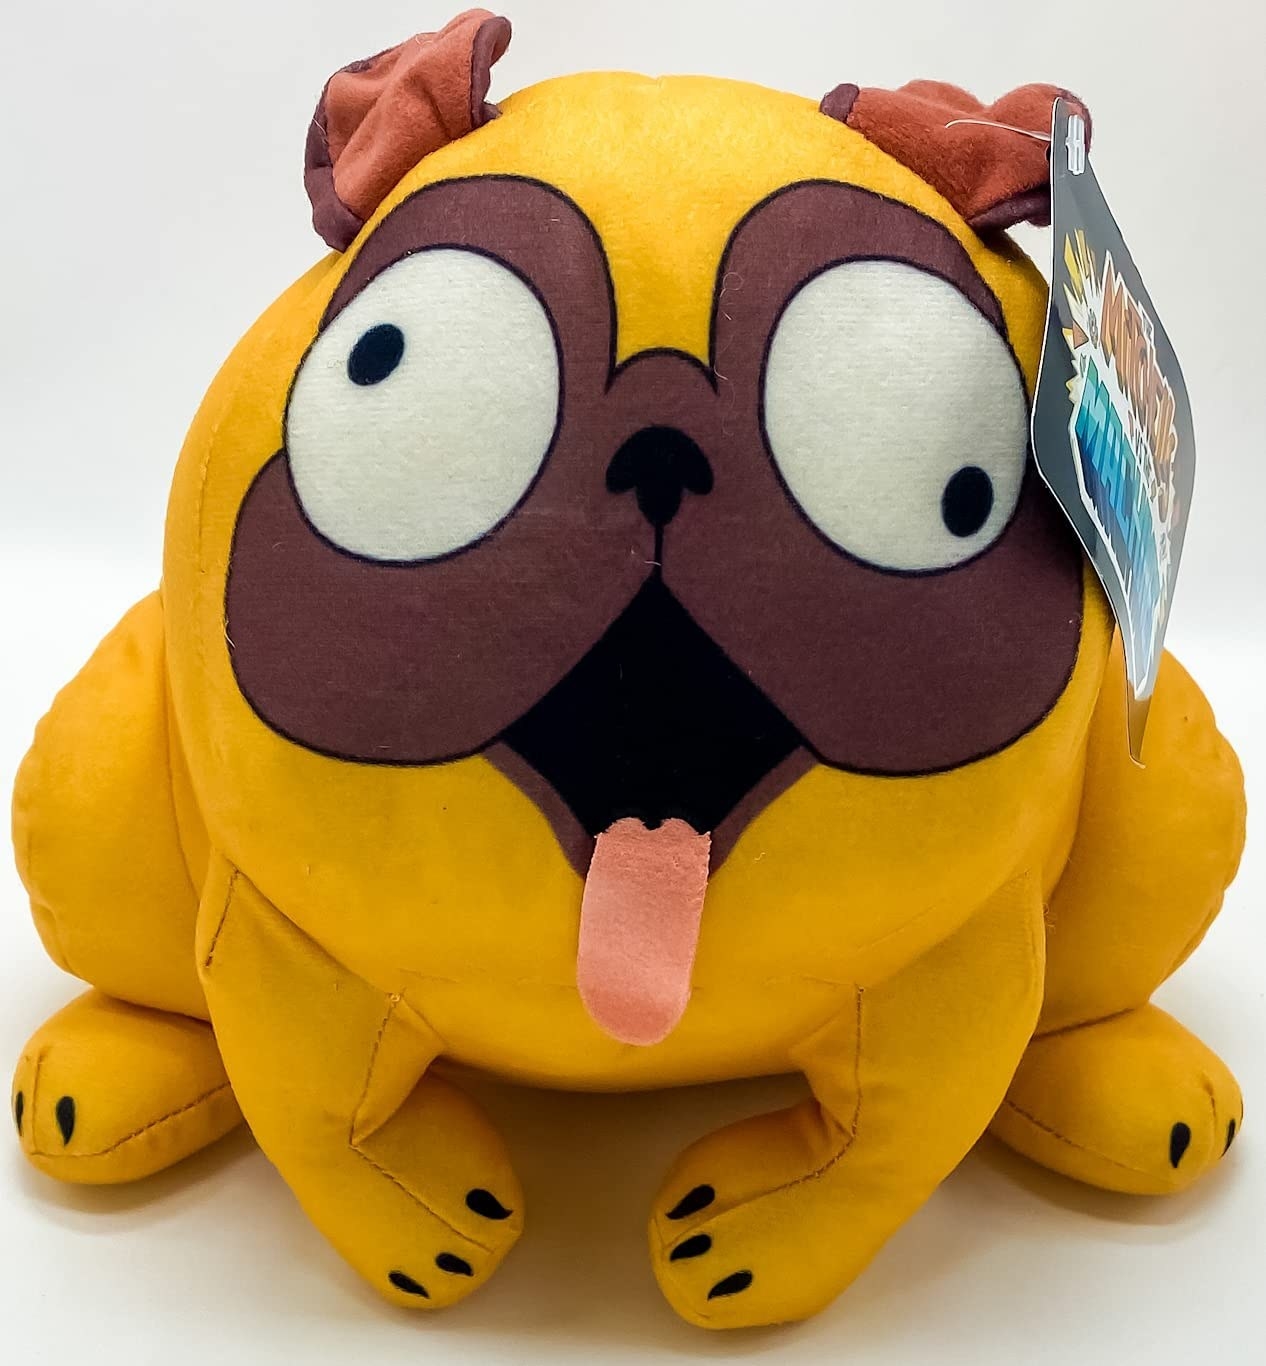 A goofy looking dog stuffed animal with googly eyes and a tongue sticking out